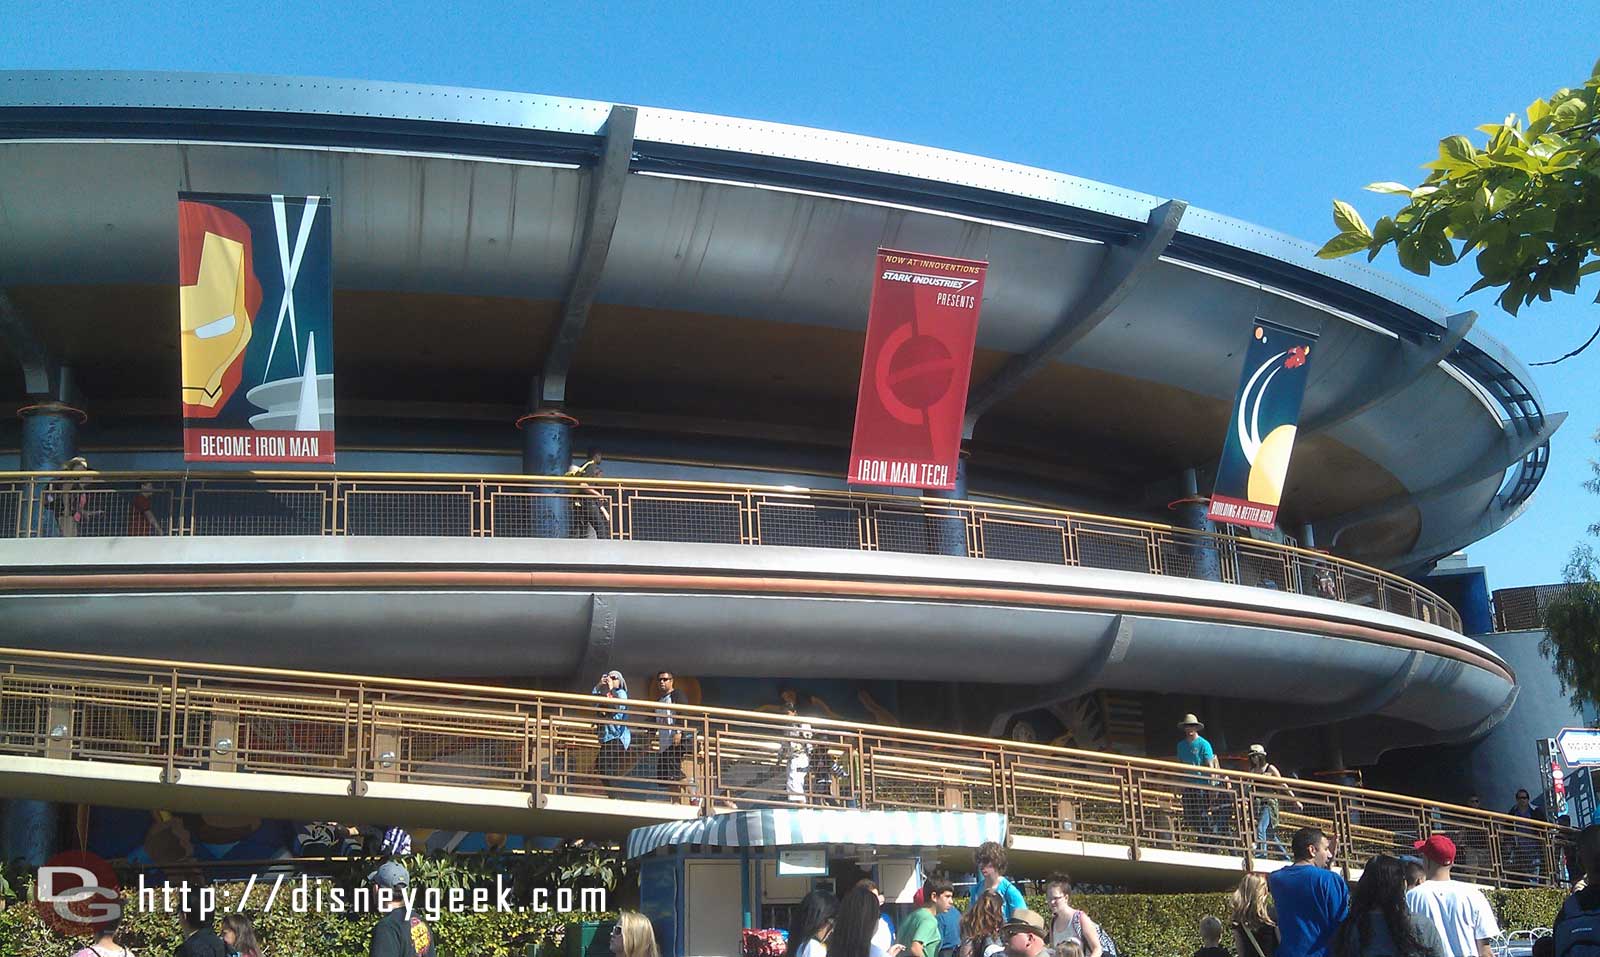 The banners on the outside of Innoventions feature Stark Industries Iron Man Tech